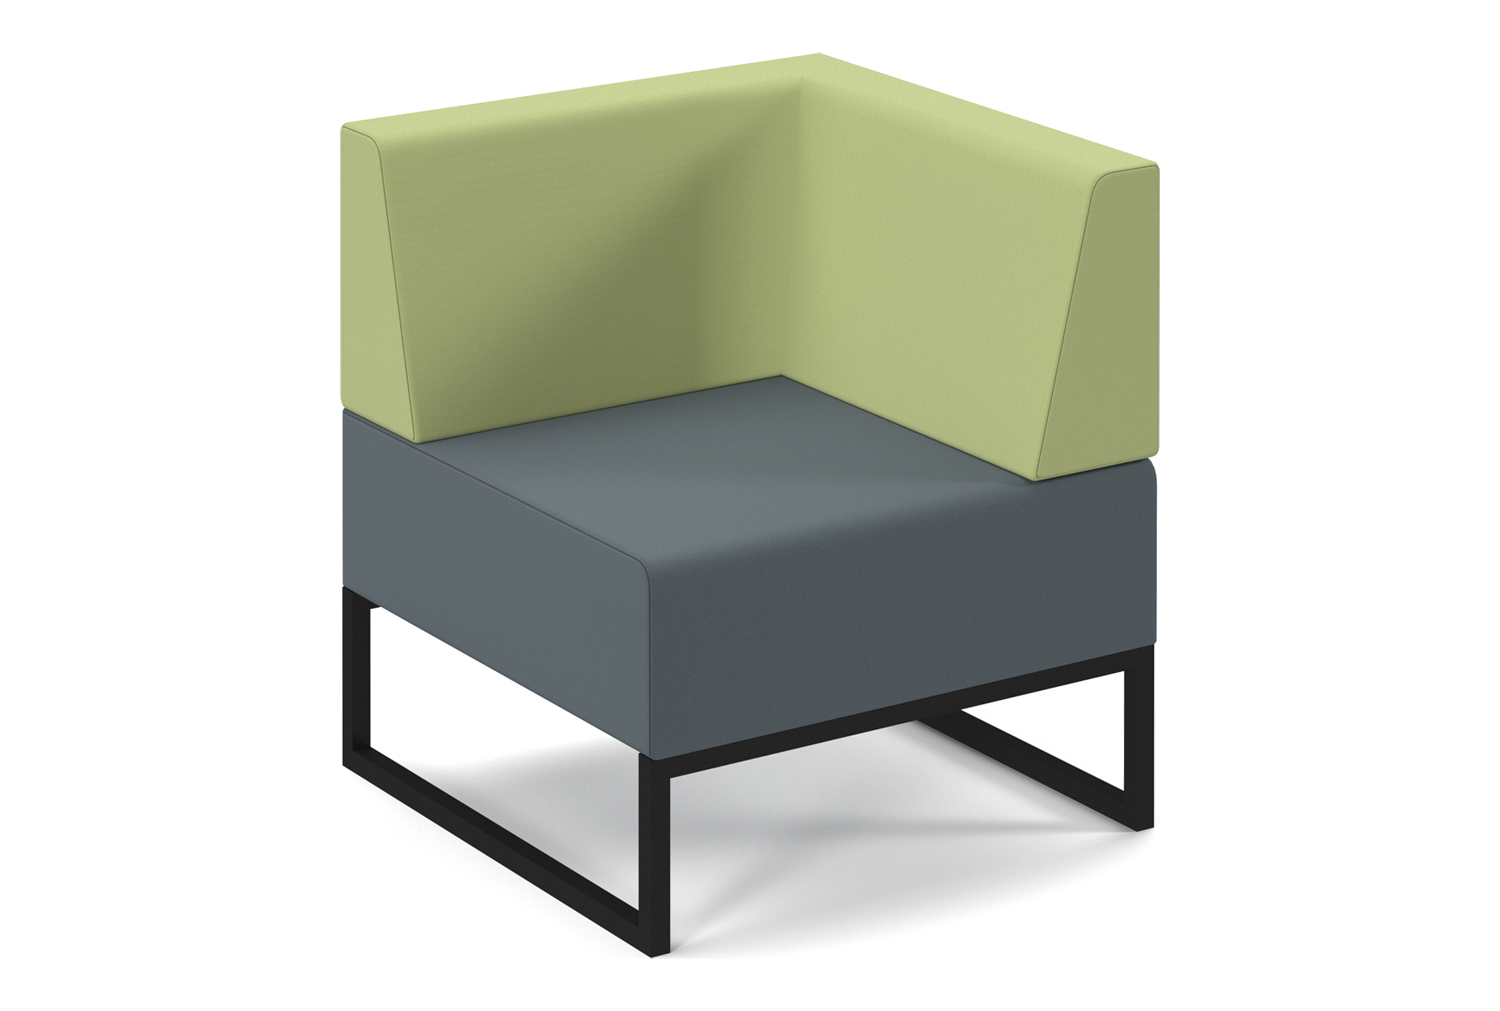 Fuse 2 Tone Single Seat With Back And Left Arm, Elapse Grey Seat/Endurance Green Back, Fully Installed